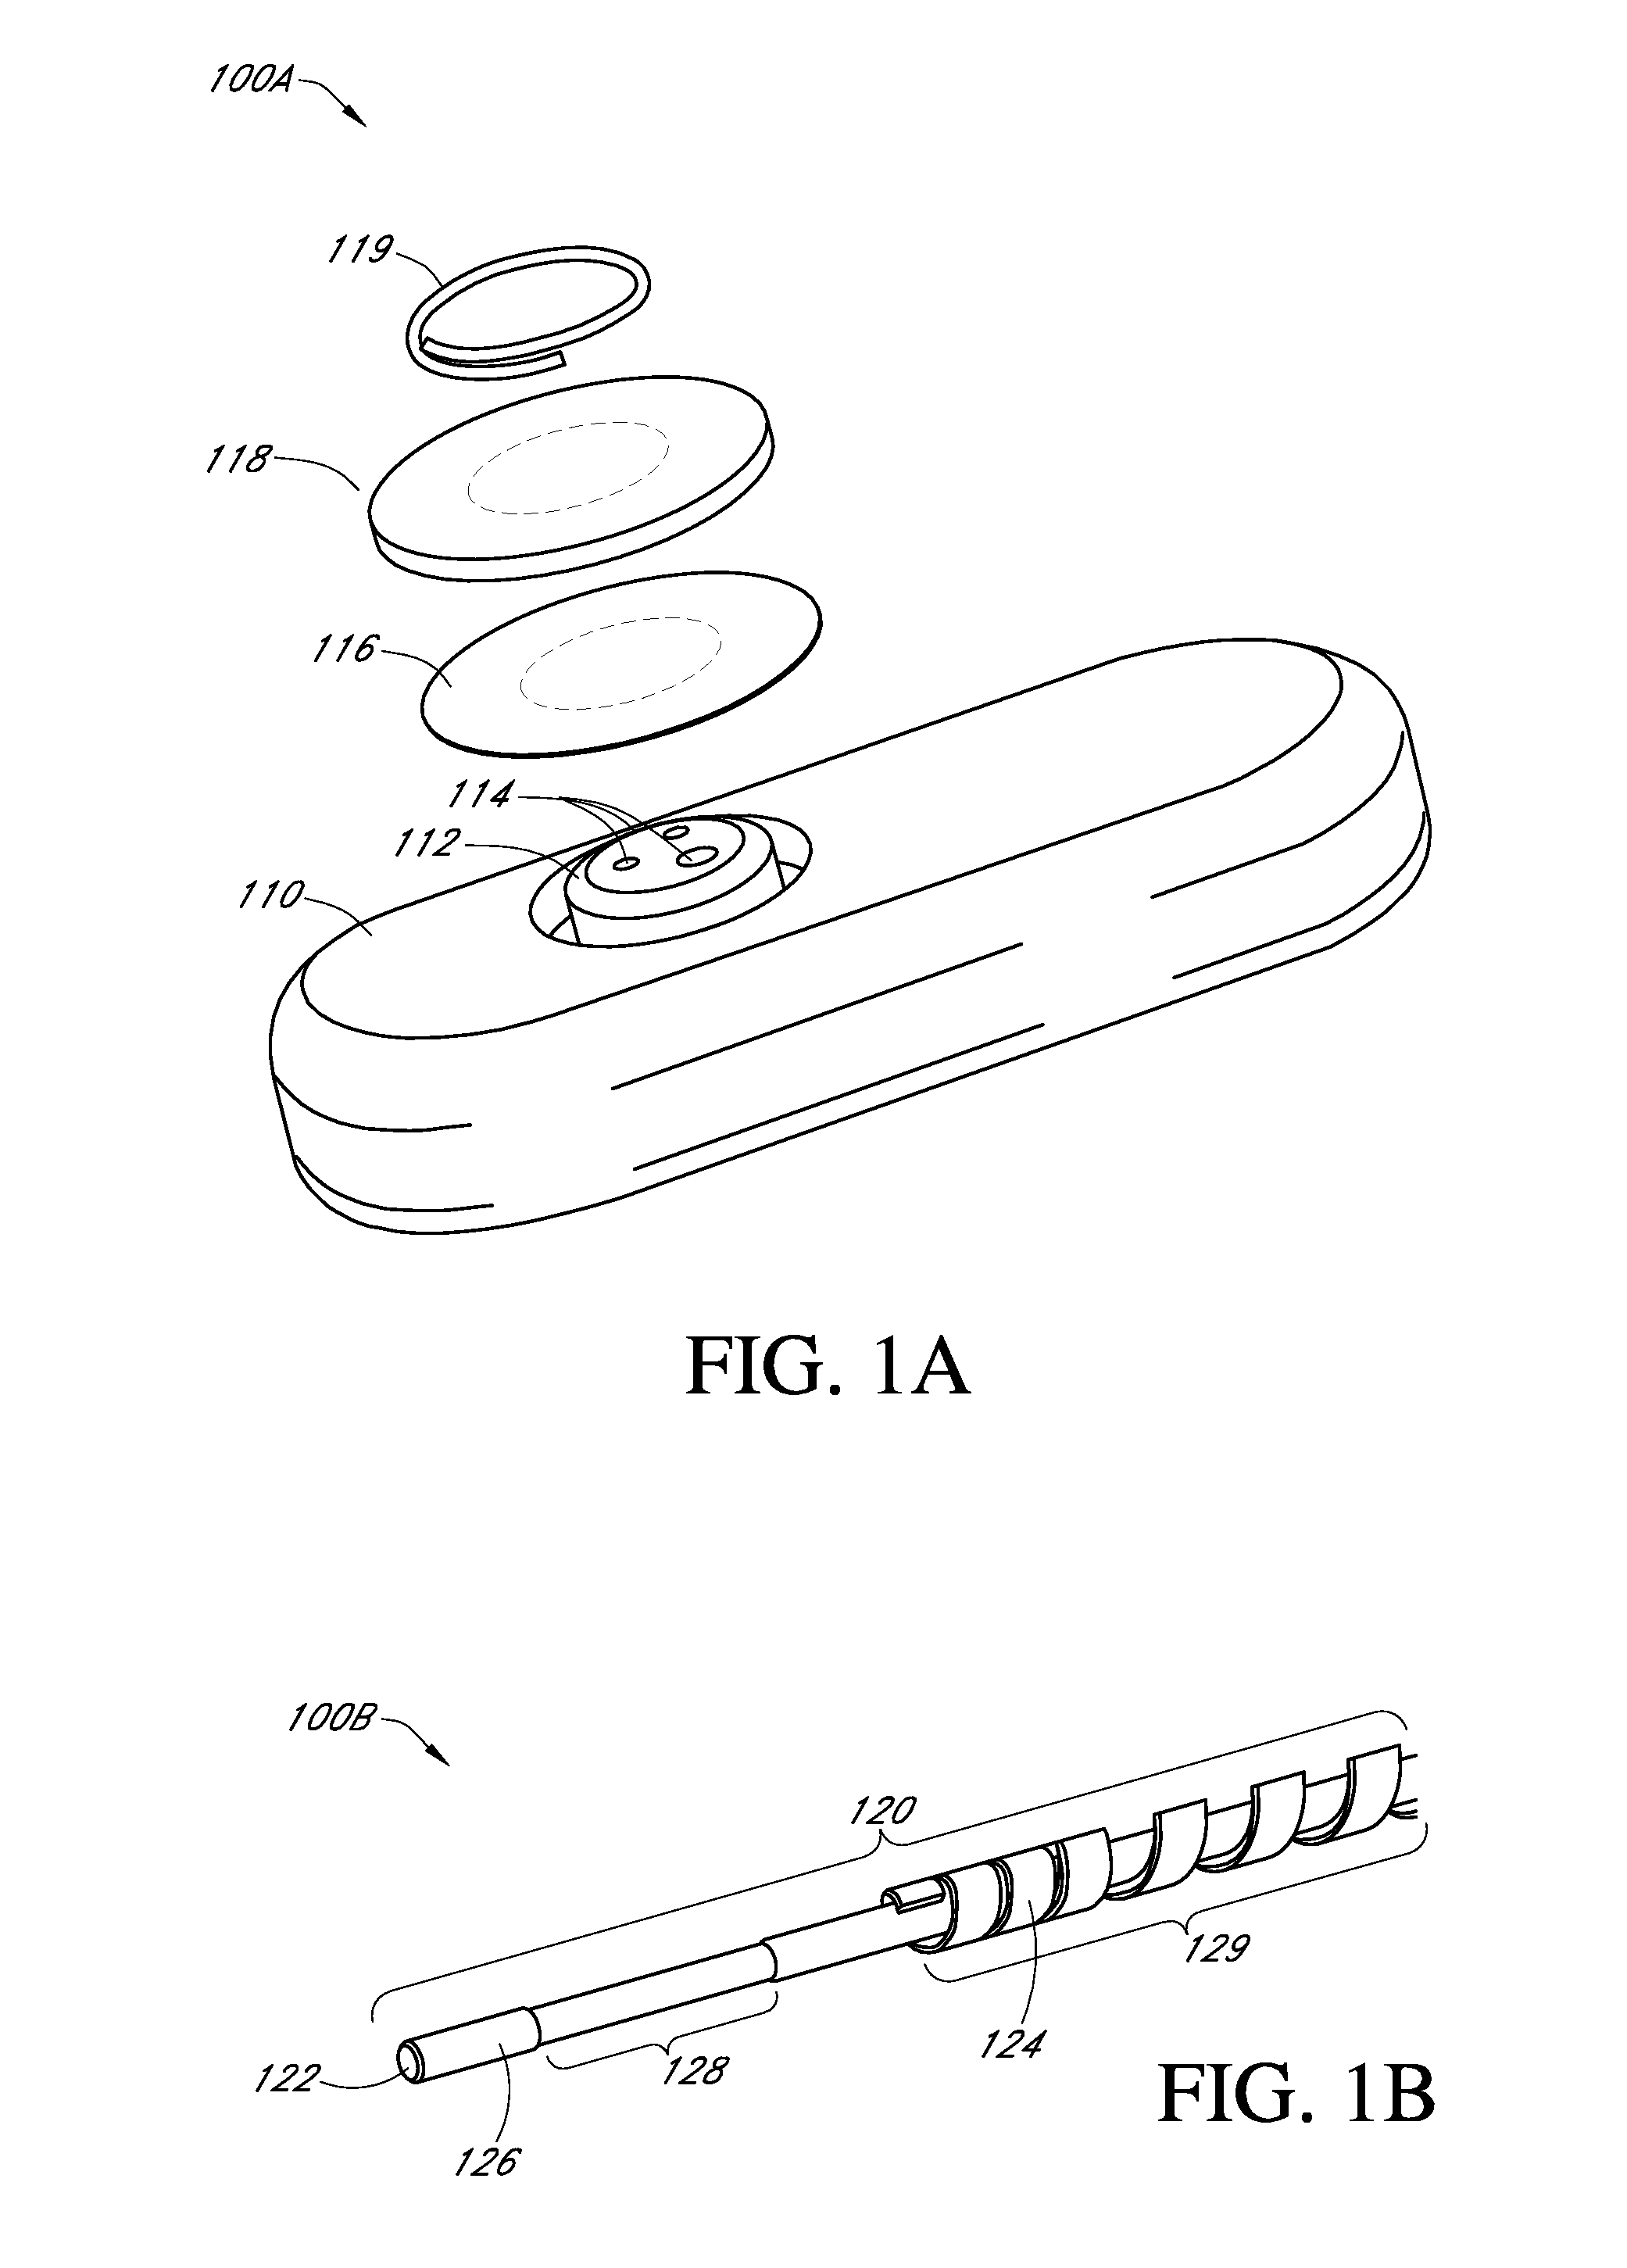 Systems and methods for processing sensor data